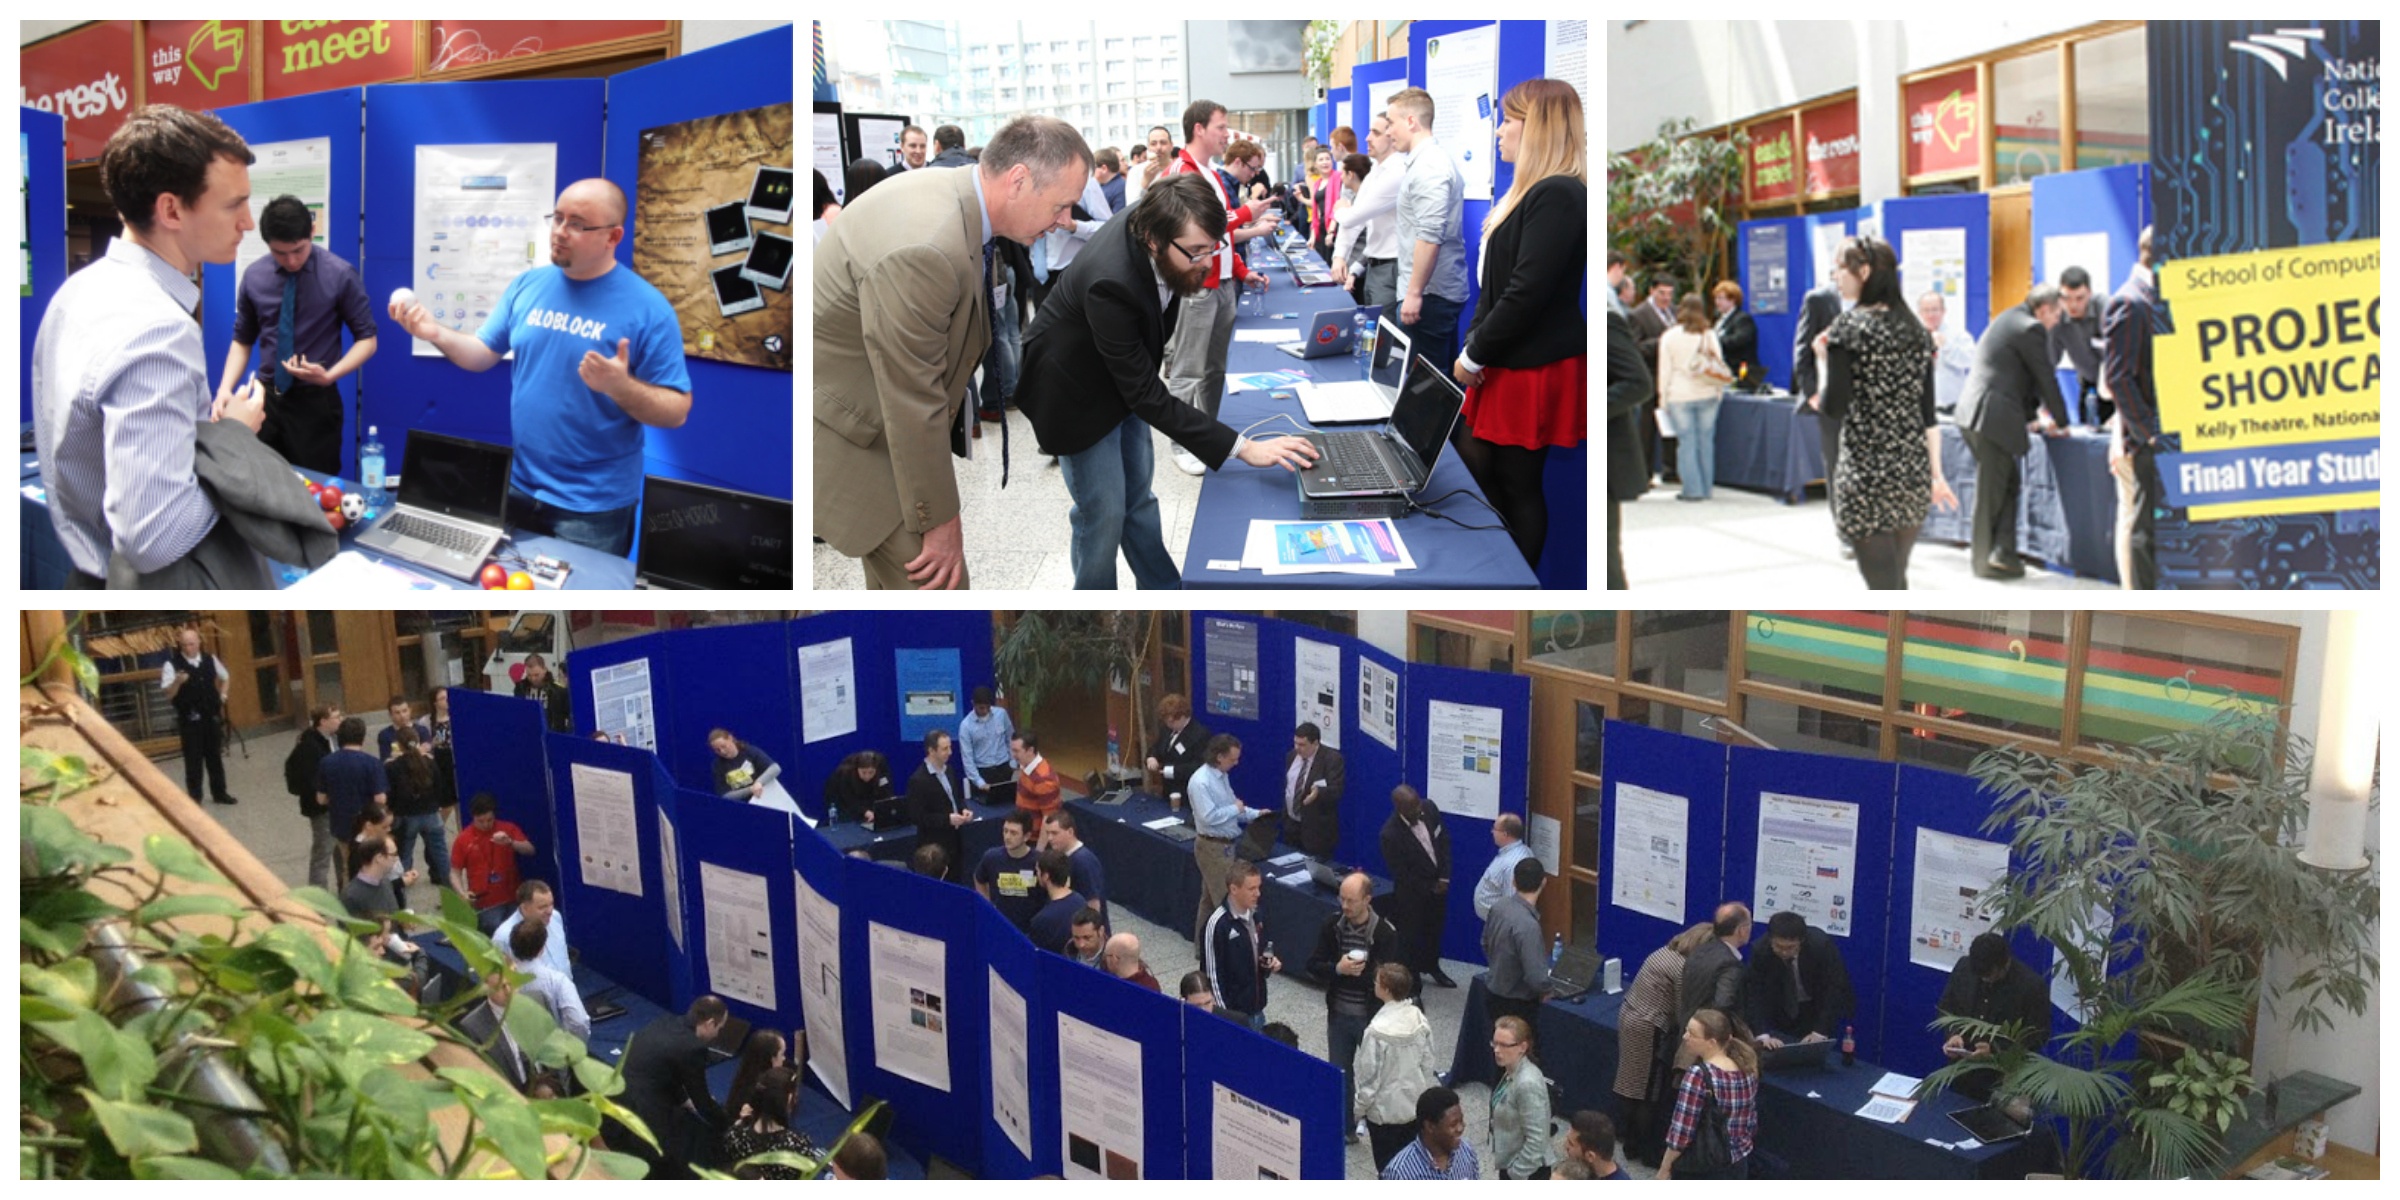 National College of Ireland urges tech employers to check out its talent!